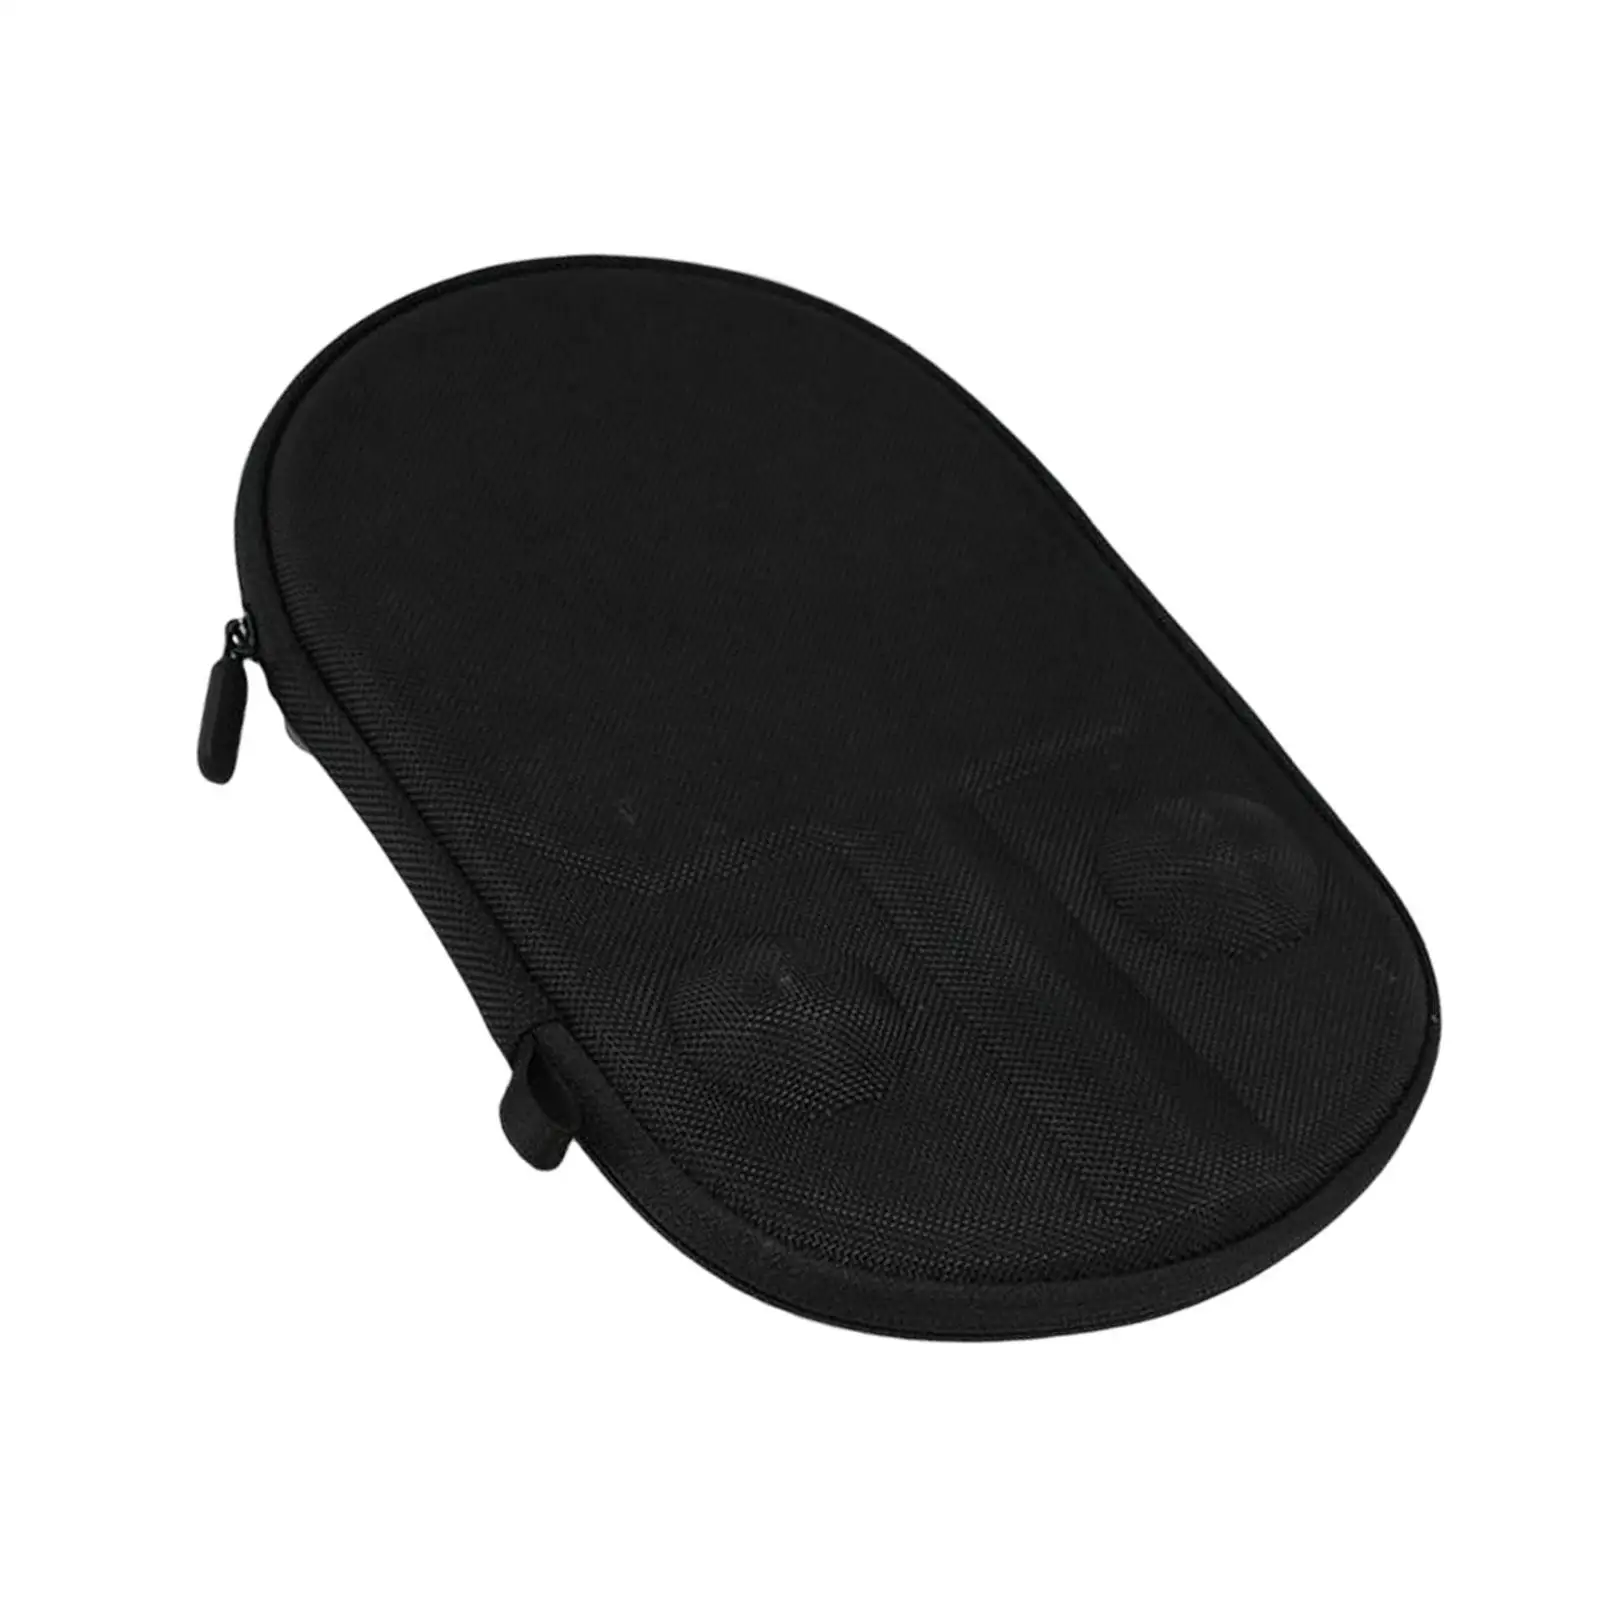 Portable Table Tennis Racket Case Lightweight Waterproof Hold 1 Racket and two